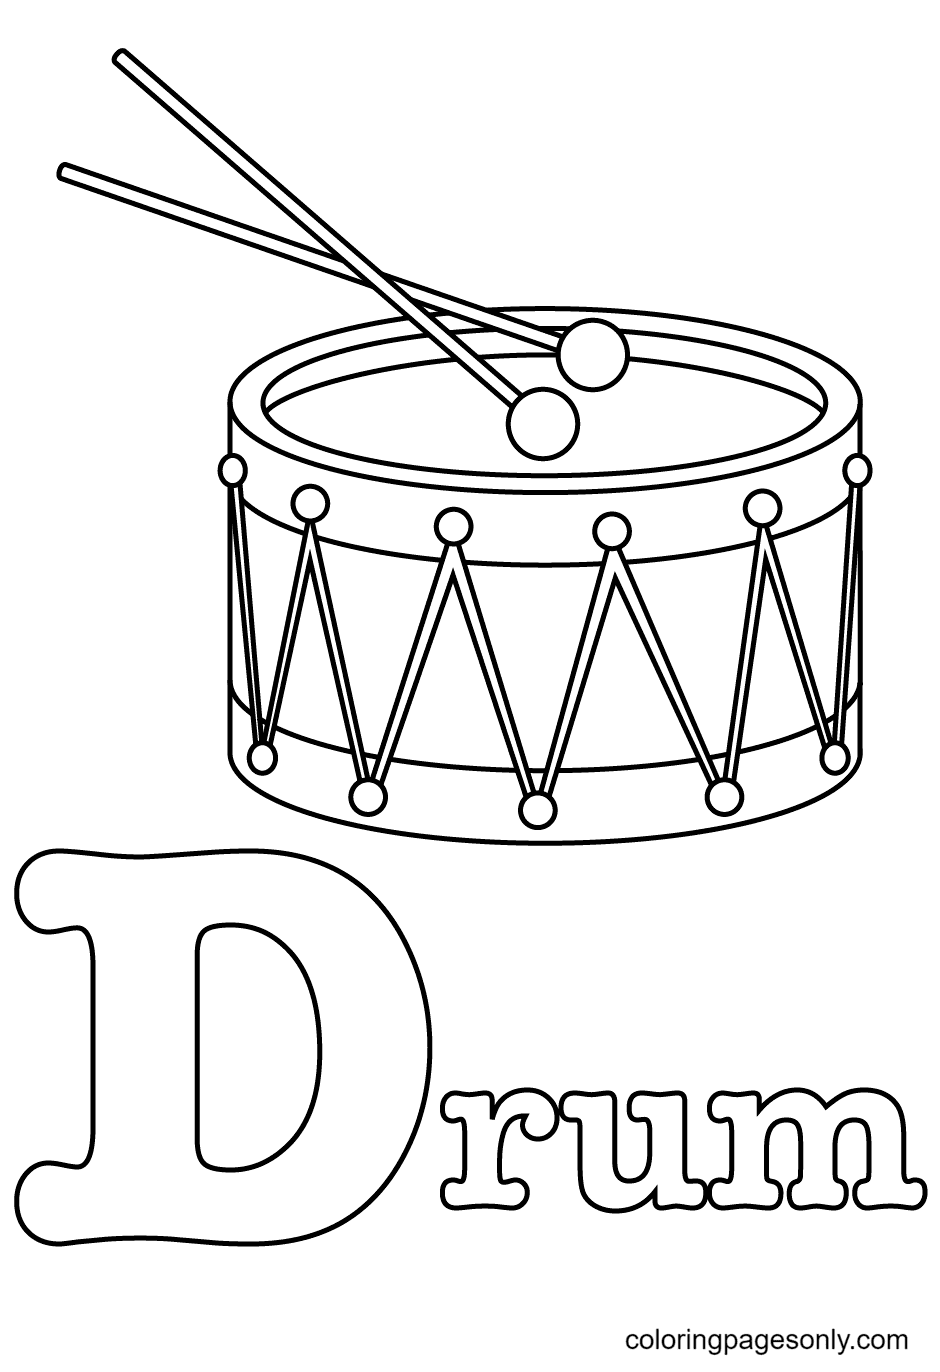 D is for Drum Coloring Page